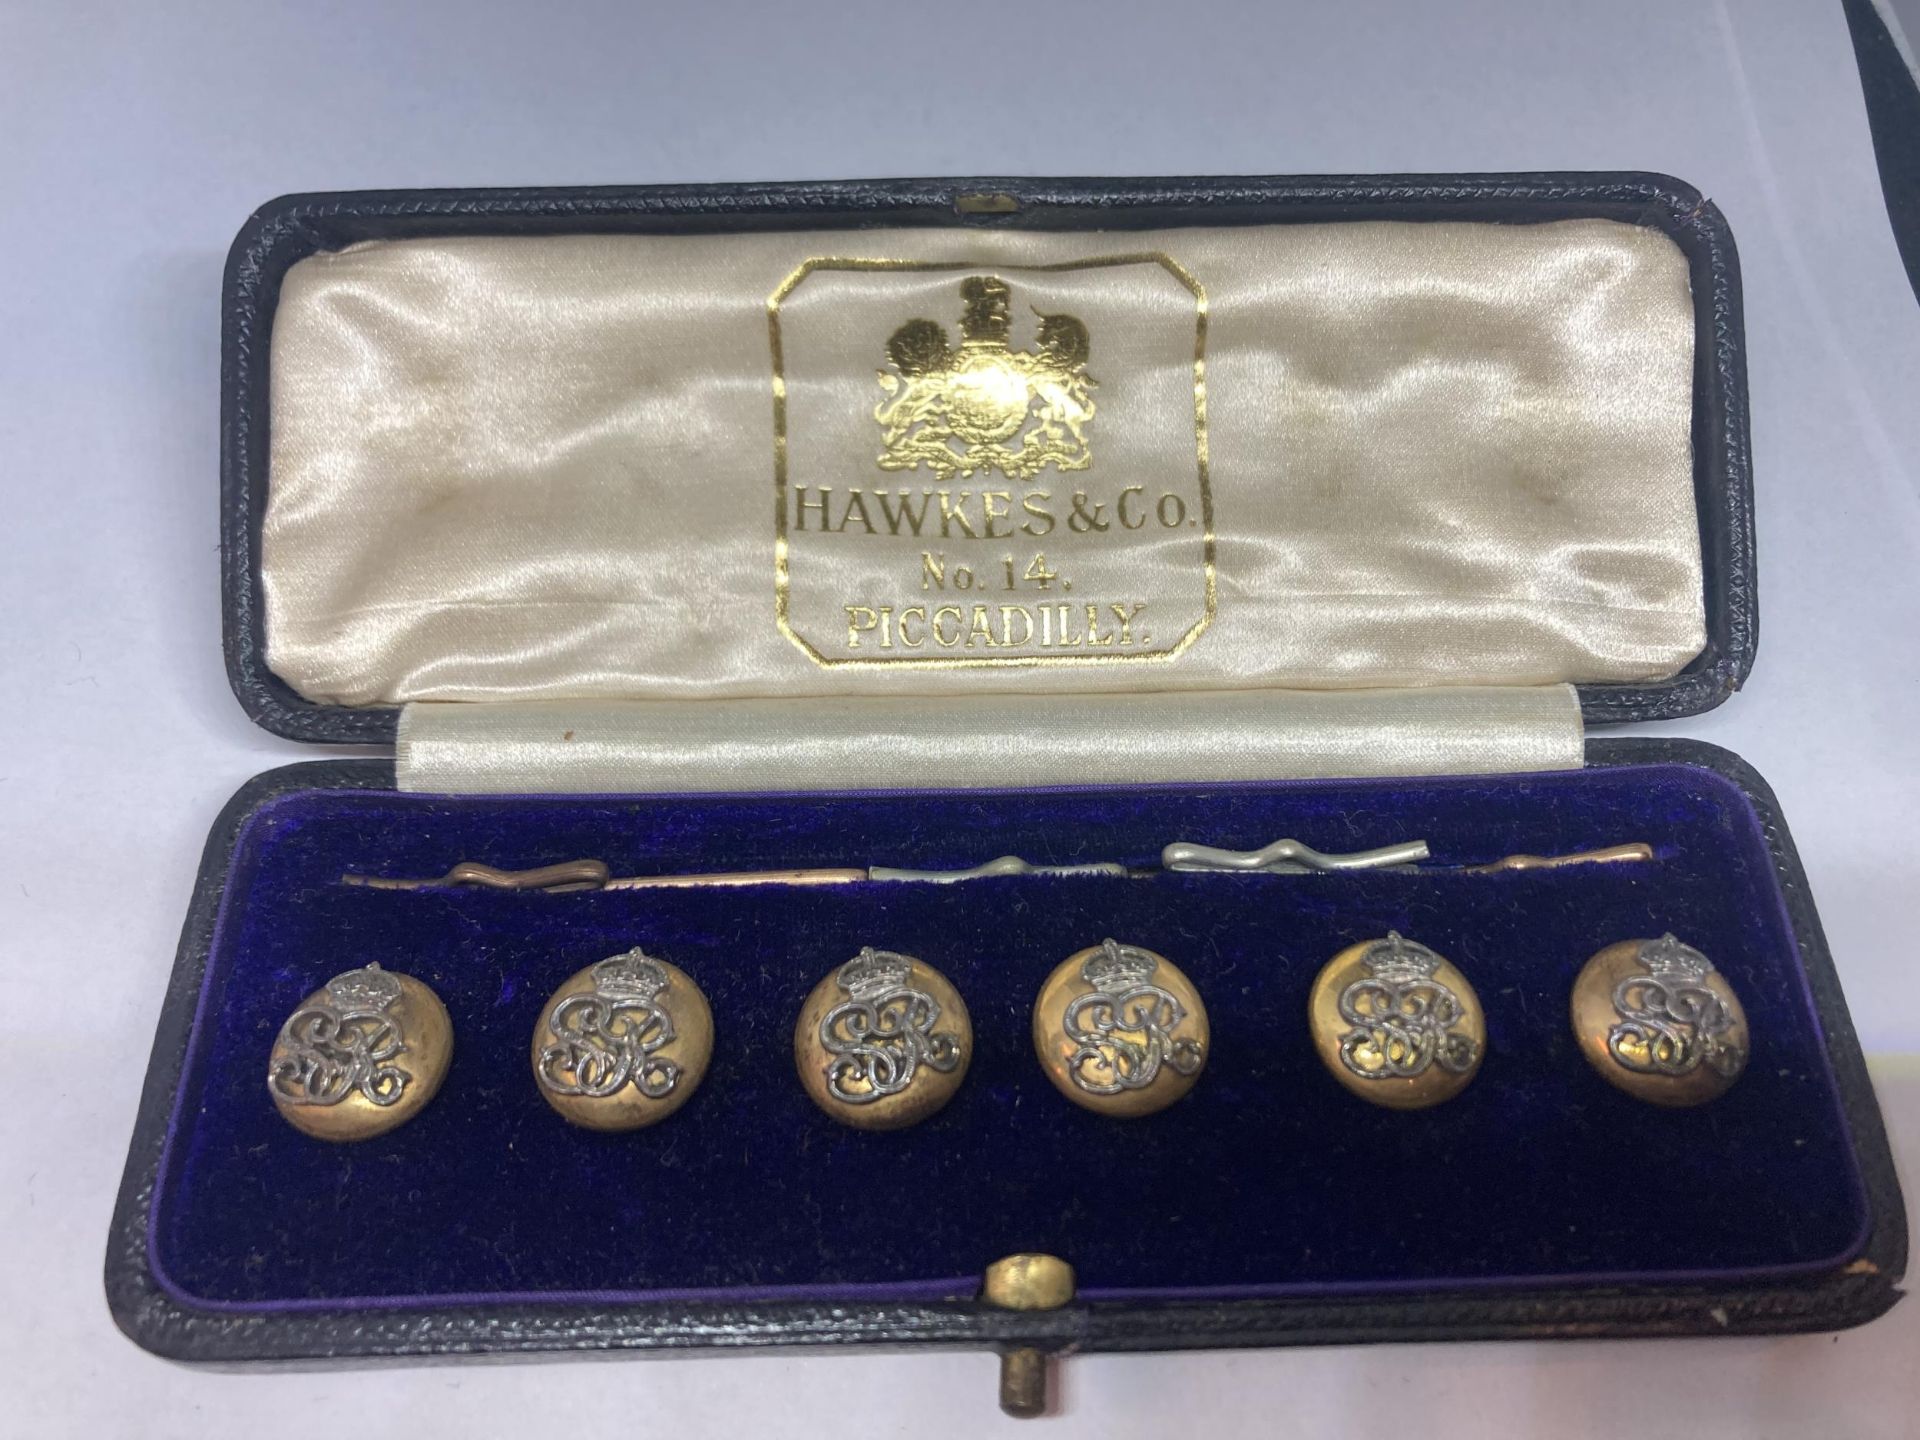 A SET OF SIX HAWKES & CO NO 14 PICCADILLY VINTAGE BUTTONS IN ORIGINAL PRESENTATION BOX - Image 2 of 3